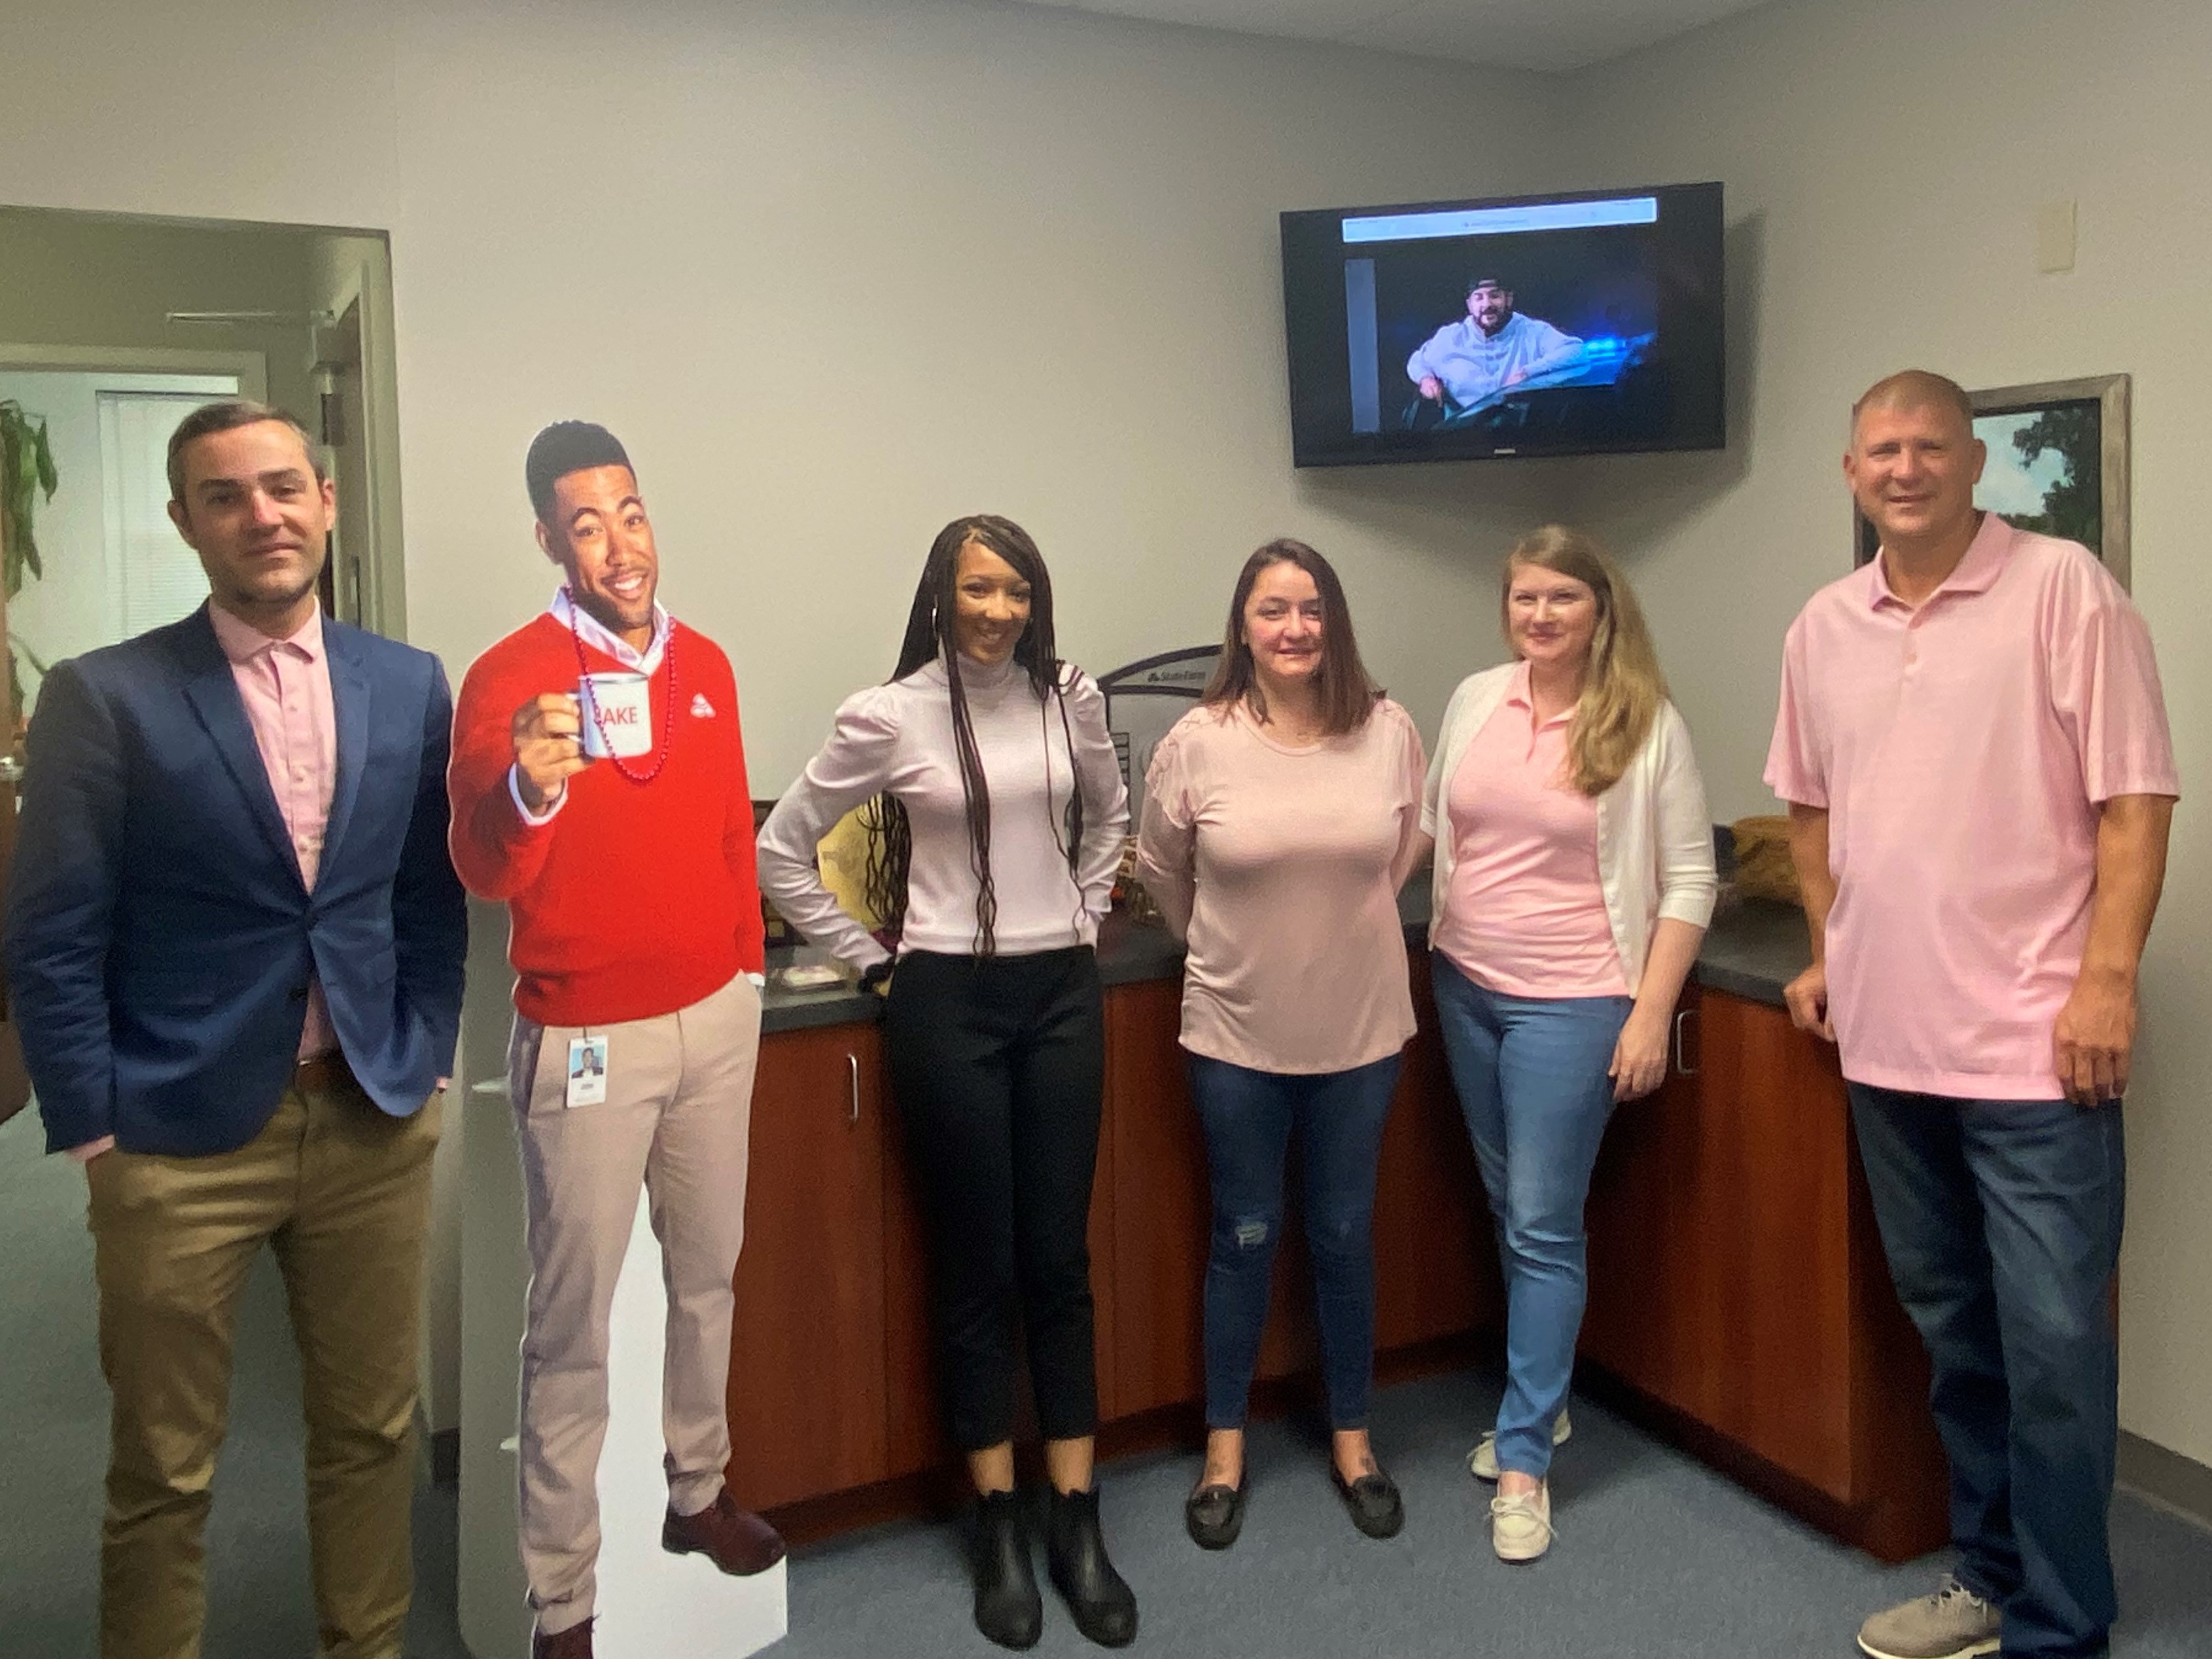 Today, we wore pink in the office in support of Breast Cancer Awareness month.